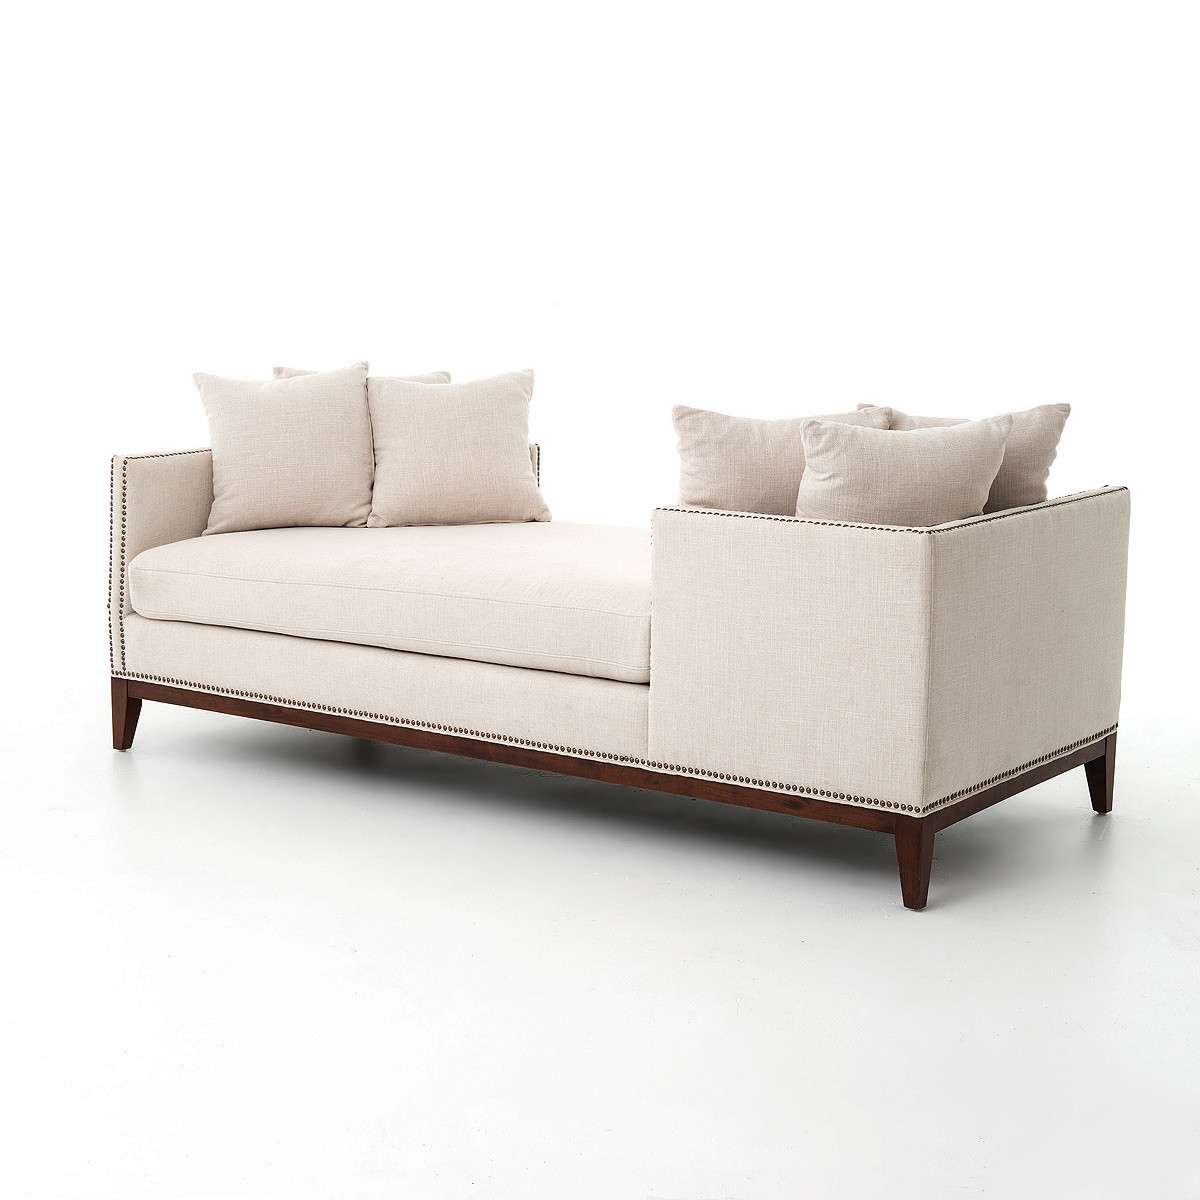 Kensington_Beige_Upholstered_Double_Chaise_Daybed__88388